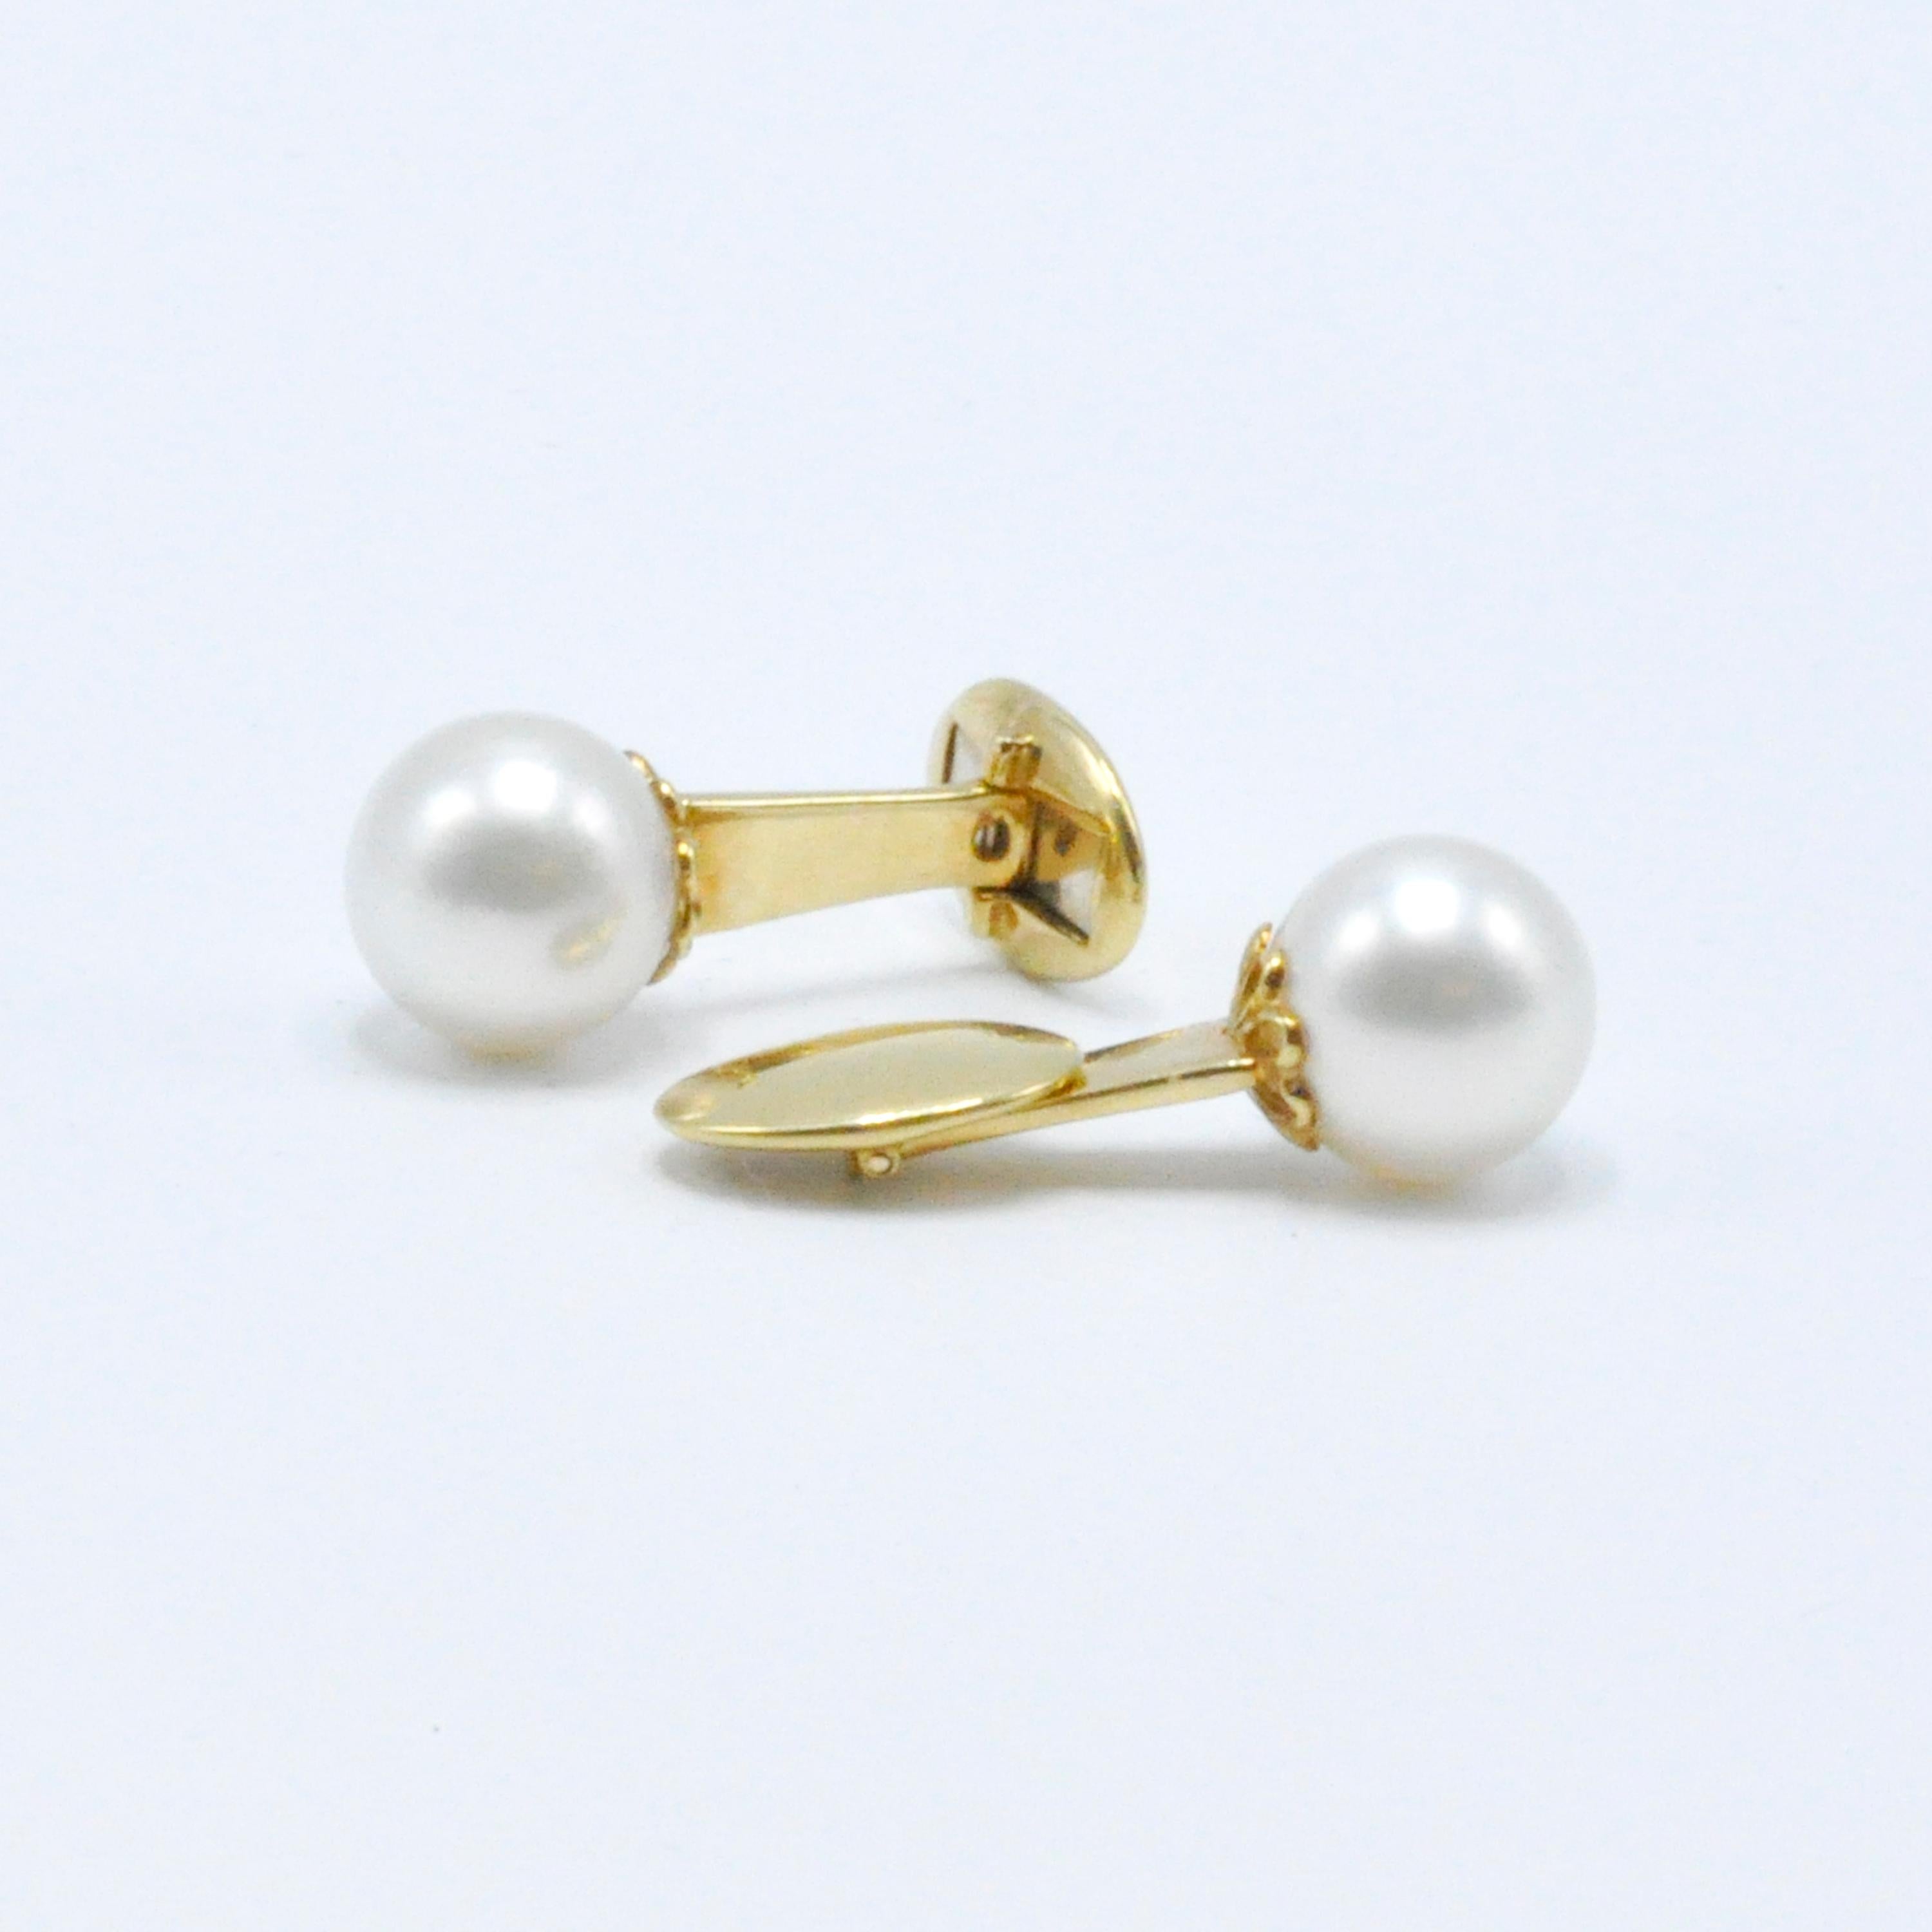 Round Cut South Sea Pearl and Yellow Gold Cufflinks